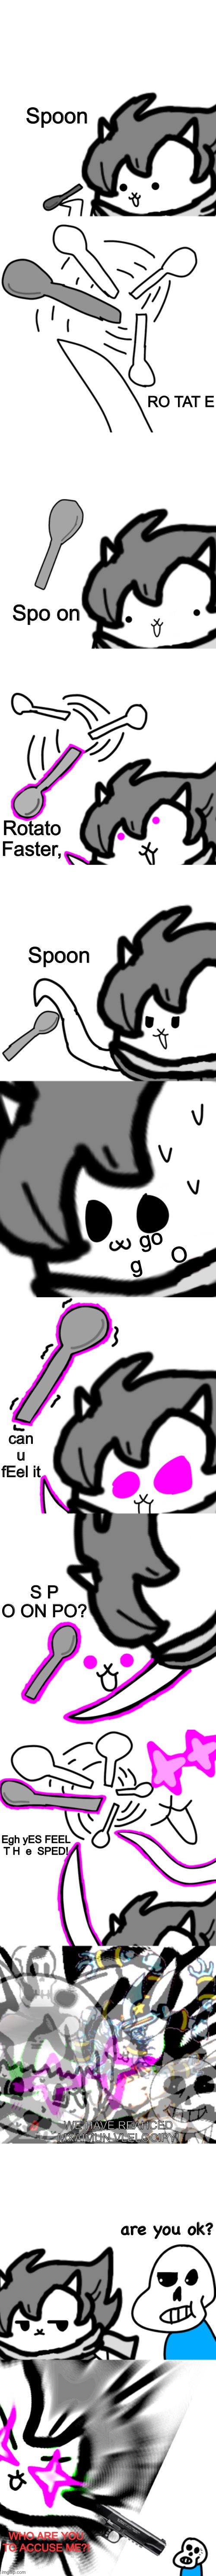 Spoon goes R O T A T E | image tagged in memes,spoon,rotate,battle,cats,drawings | made w/ Imgflip meme maker